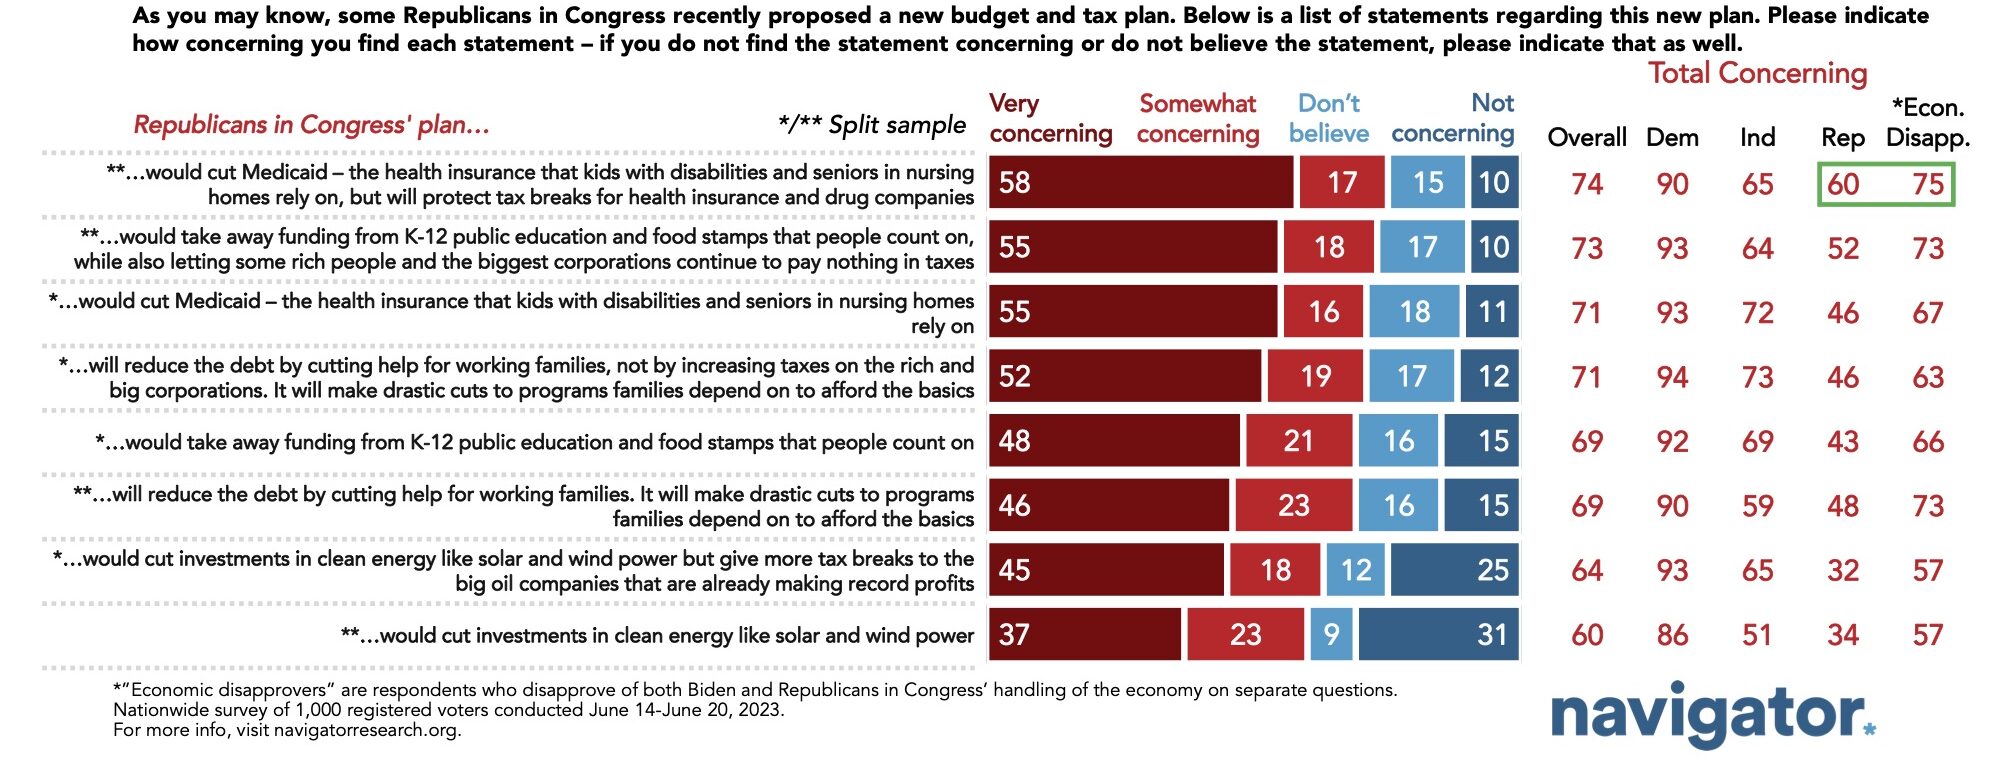 Bar graphs showing survey results to the following question: As you may know, some Republicans in Congress recently proposed a new budget and tax plan. Below is a list of statements regarding this new plan. Please indicate how concerning you find each statement – if you do not find the statement concerning or do not believe the statement, please indicate that as well.